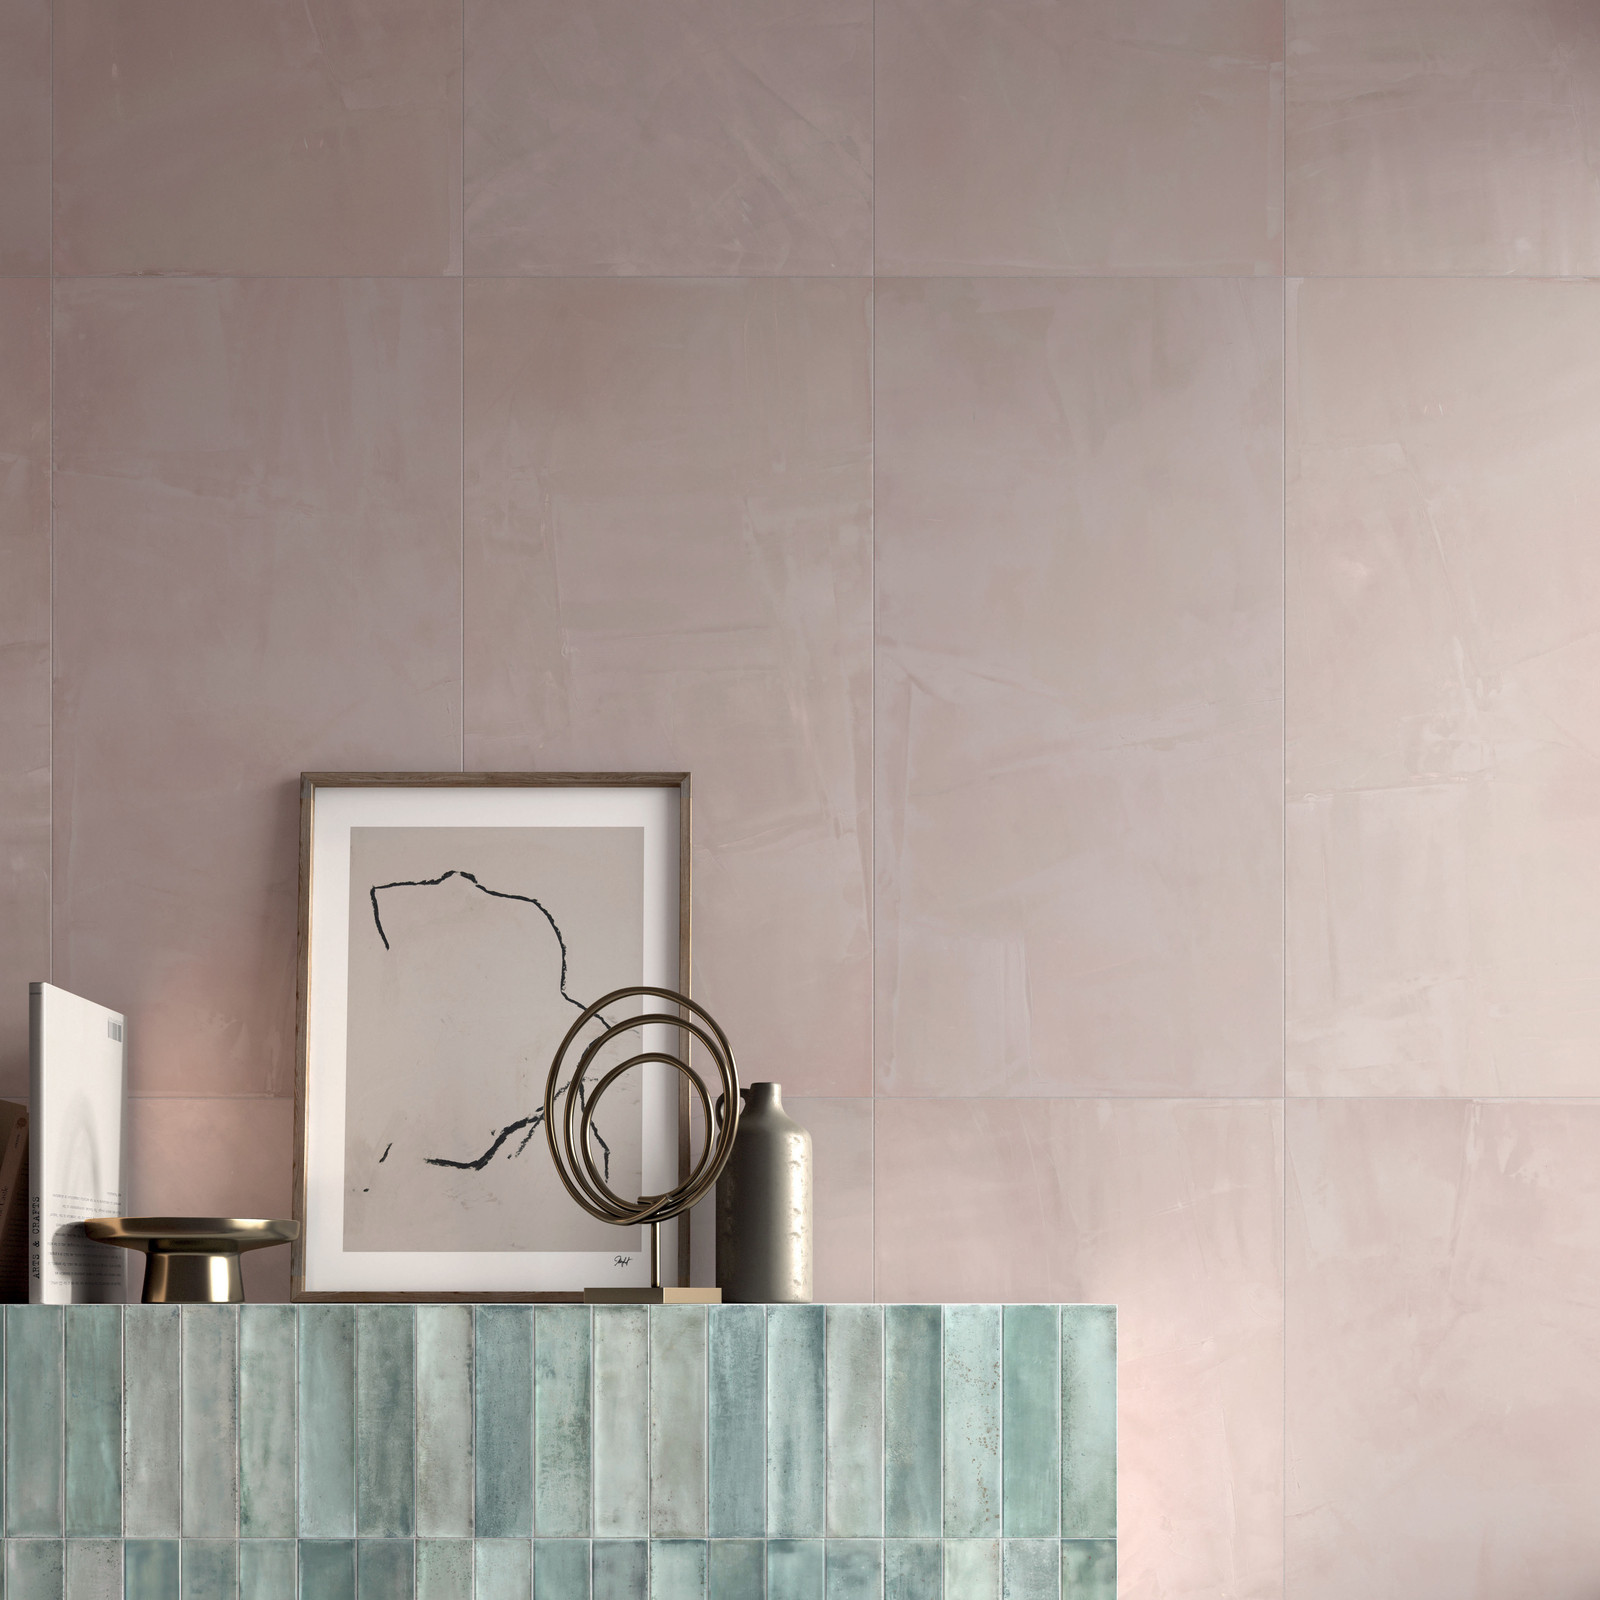 Paint Rose R10 series porcelain tile floor and wall tiles by Dado Ceramica
